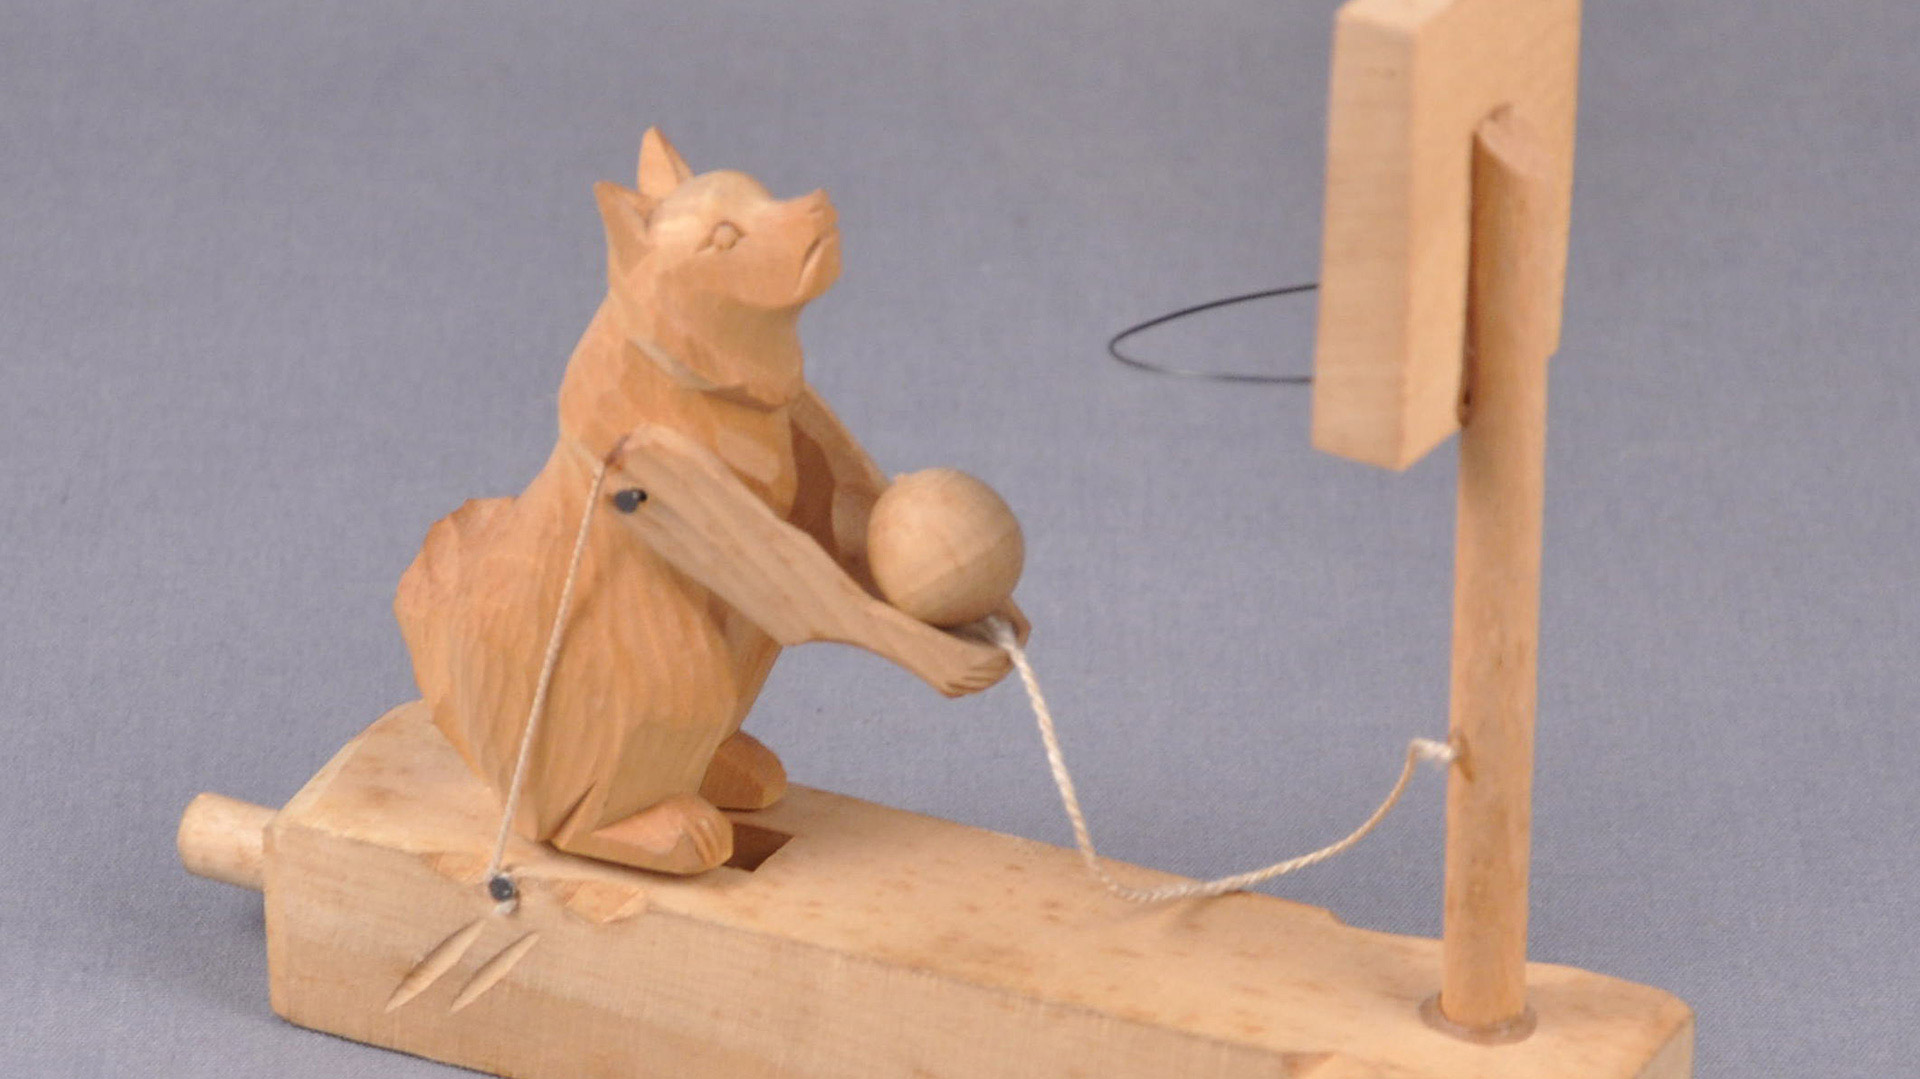 Child's toy: a wood carving of a fox holding a sphere. A string attaches the wooden sphere to a wooden basketball hoop